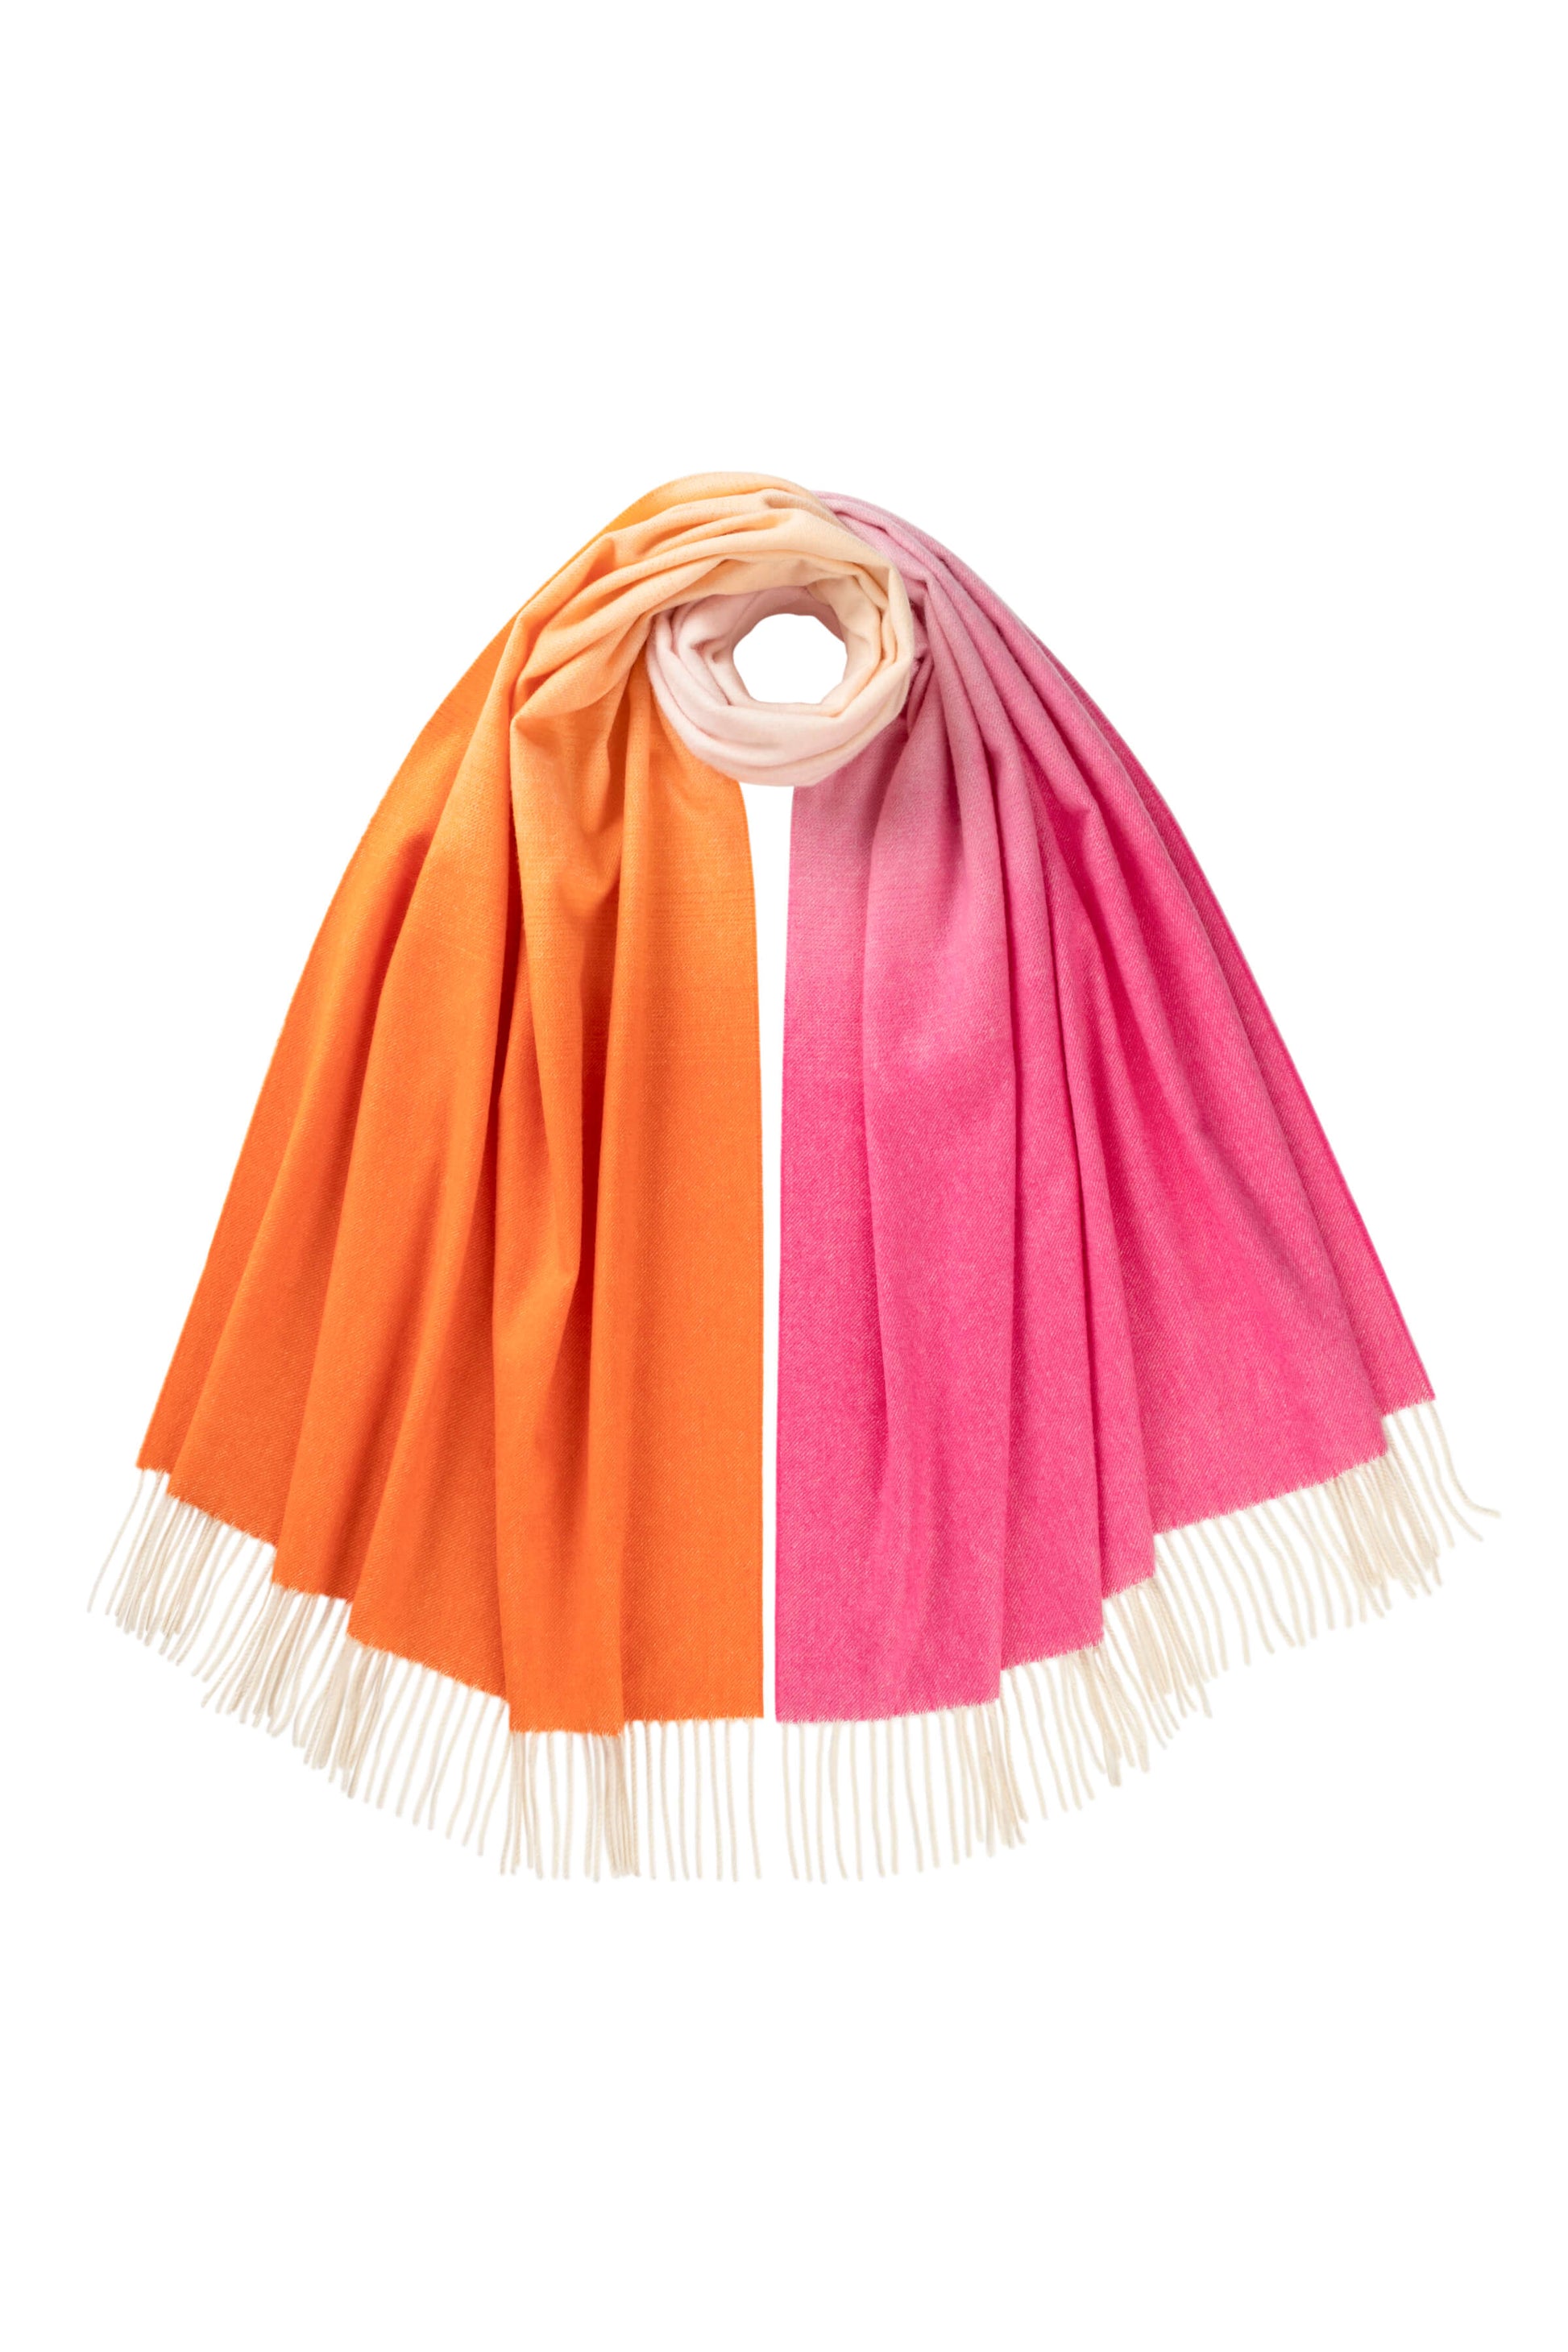 Johnstons of Elgin SS24 Accessories Orange & Pink Ombré Cashmere Stole WA000056RU7431ONE